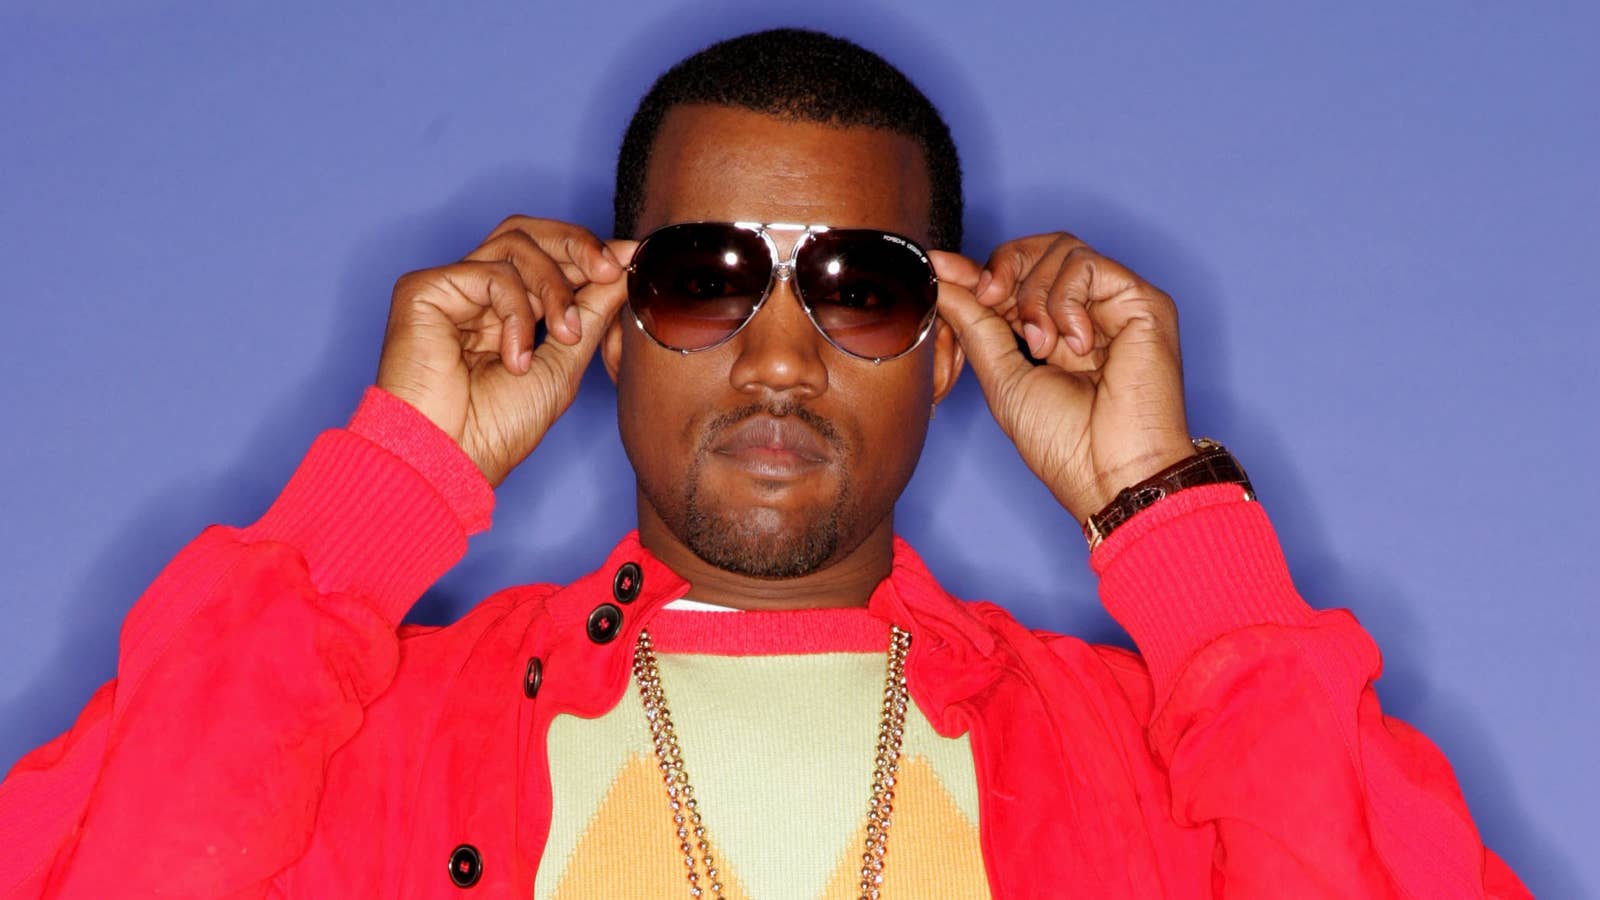 Kanye West poses for a portrait during the 2004 Billboard Music Awards